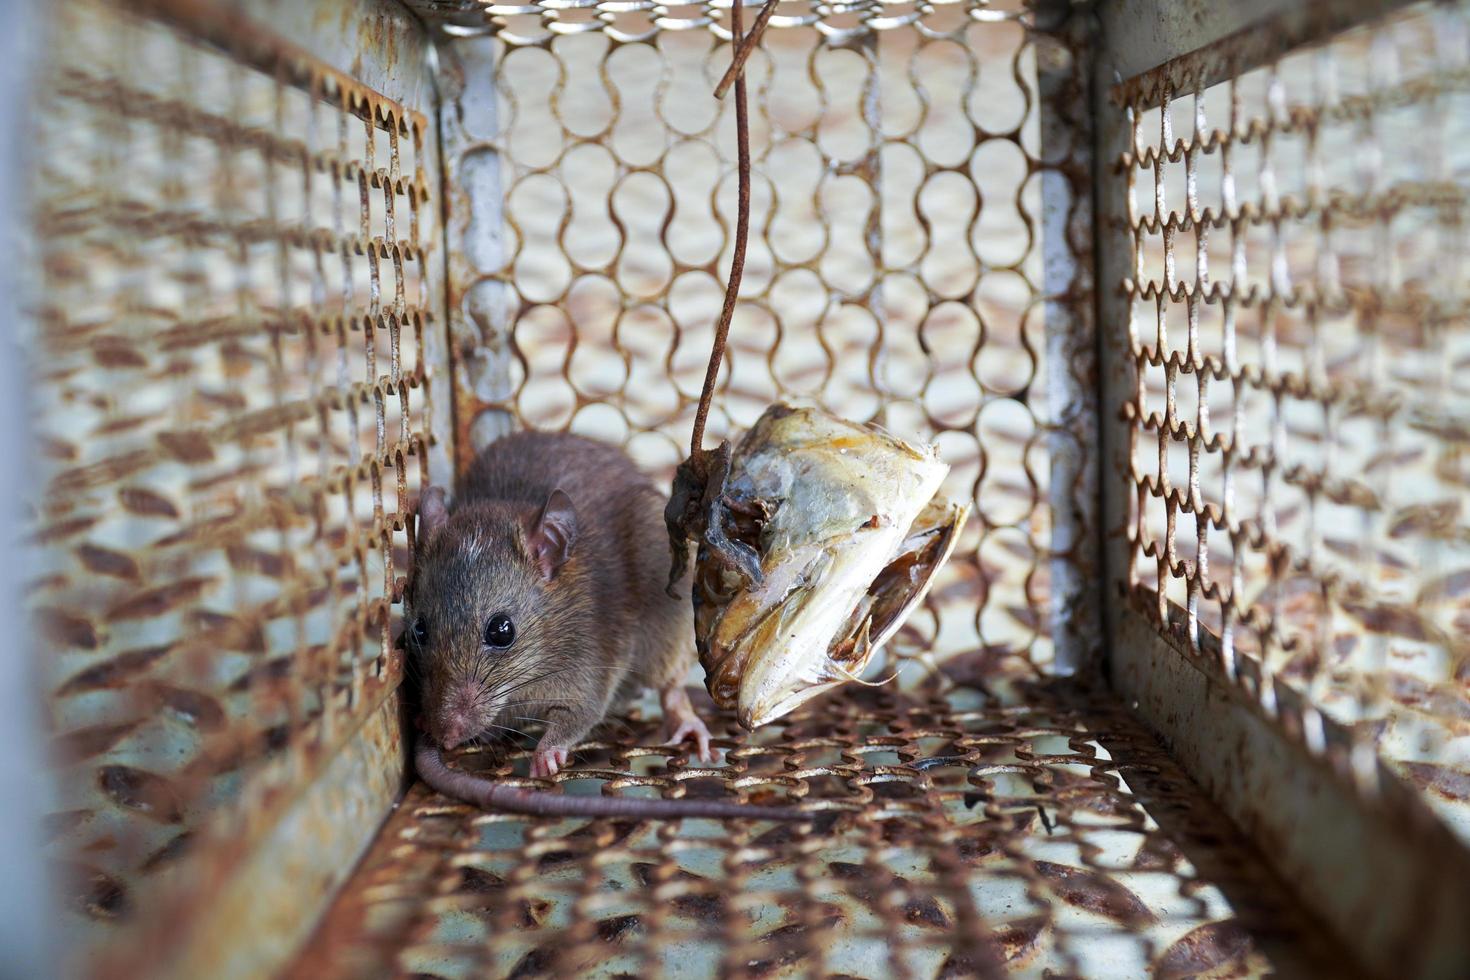 https://static.vecteezy.com/system/resources/previews/002/191/185/non_2x/rodent-trapped-in-a-mouse-trap-cage-free-photo.jpg